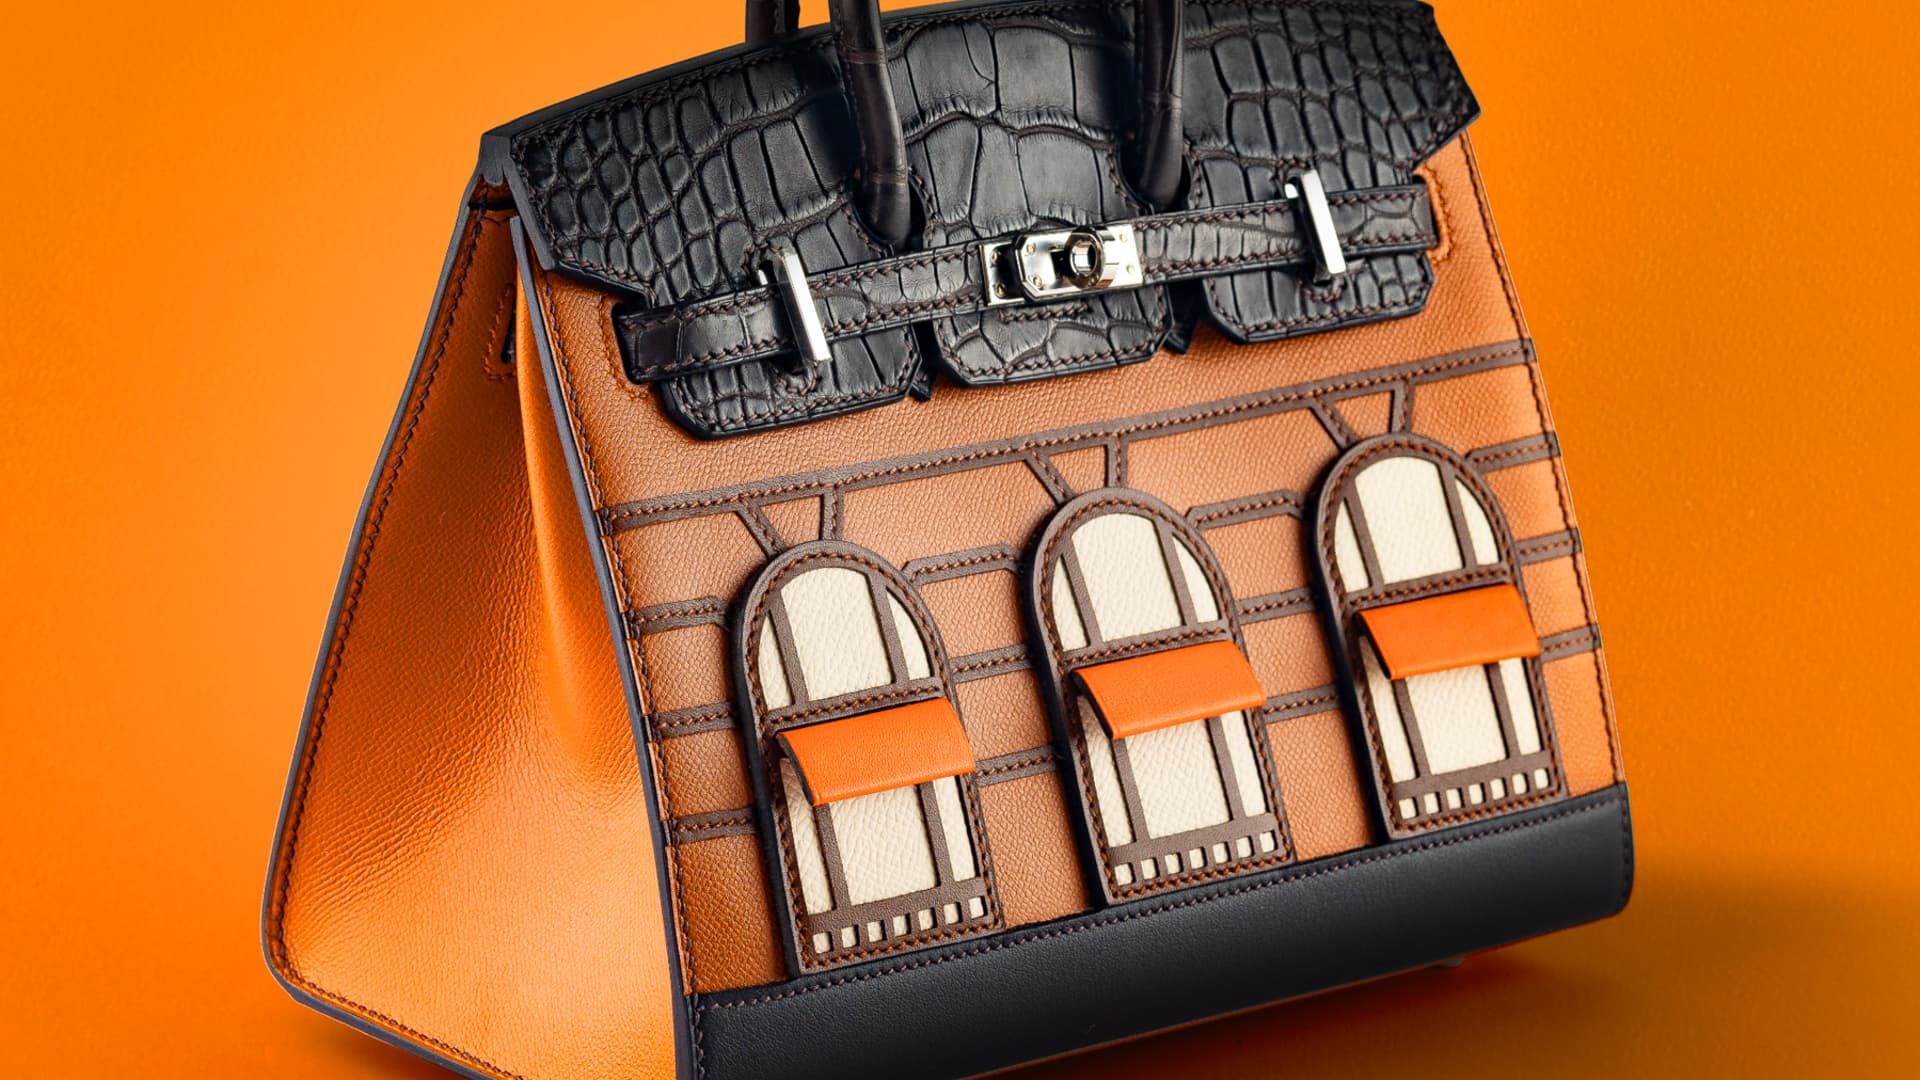 A limited-edition Hermes Birkin bag, featuring designs representing the atelier's famed Rue du Faubourg shop in Paris, which Rally users can currently invest in on the platform at the price of $72 per share.